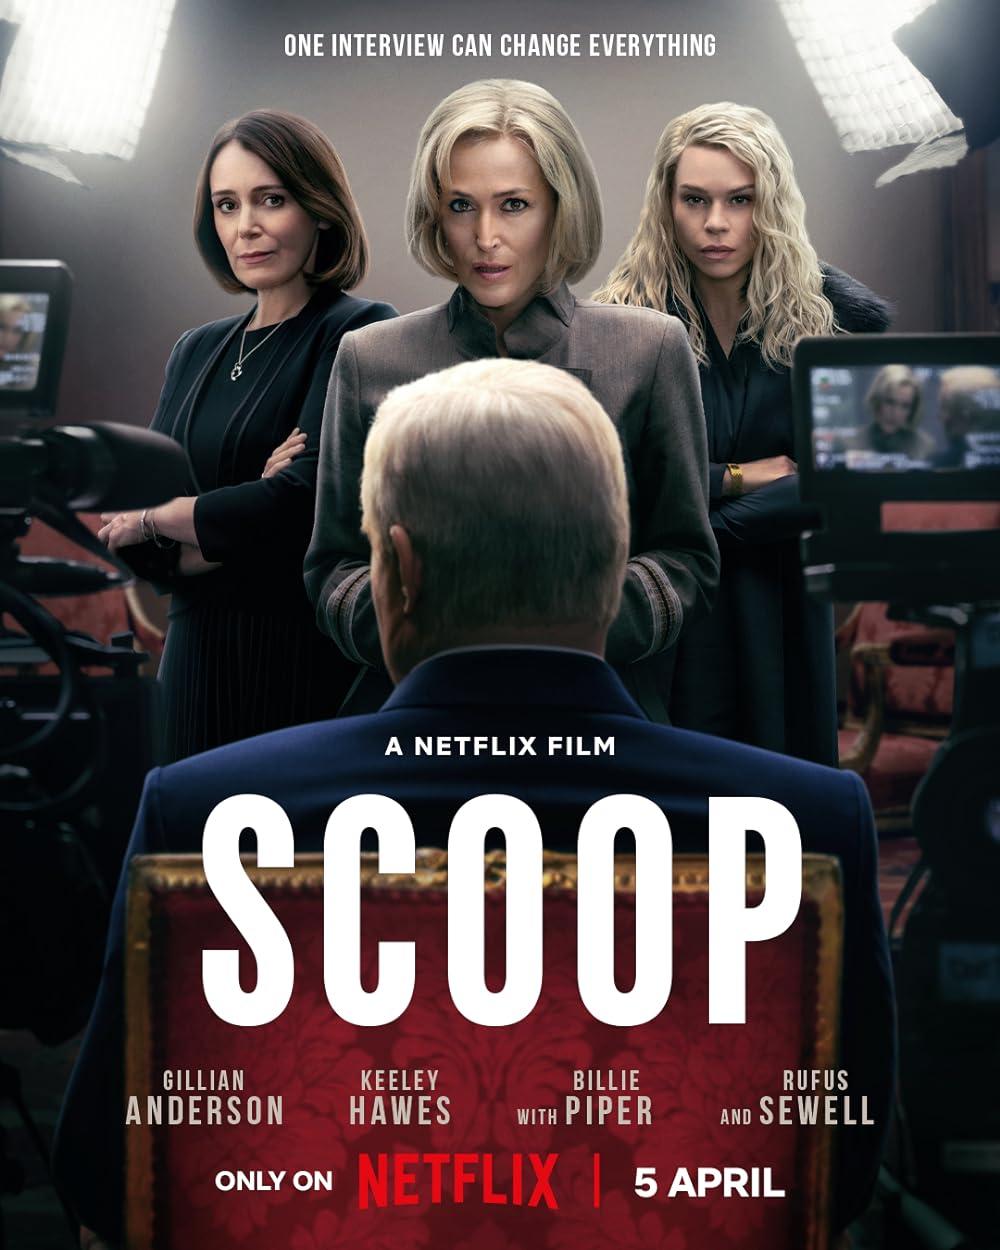 Scoop - April 5 (Netflix)Delve into the gripping world of investigative journalism with 'Scoop,' as journalists uncover the truth behind Prince Andrew's infamous interview. With a stellar cast and riveting storytelling, this intimate portrayal offers a revealing glimpse into the power dynamics of media and monarchy.